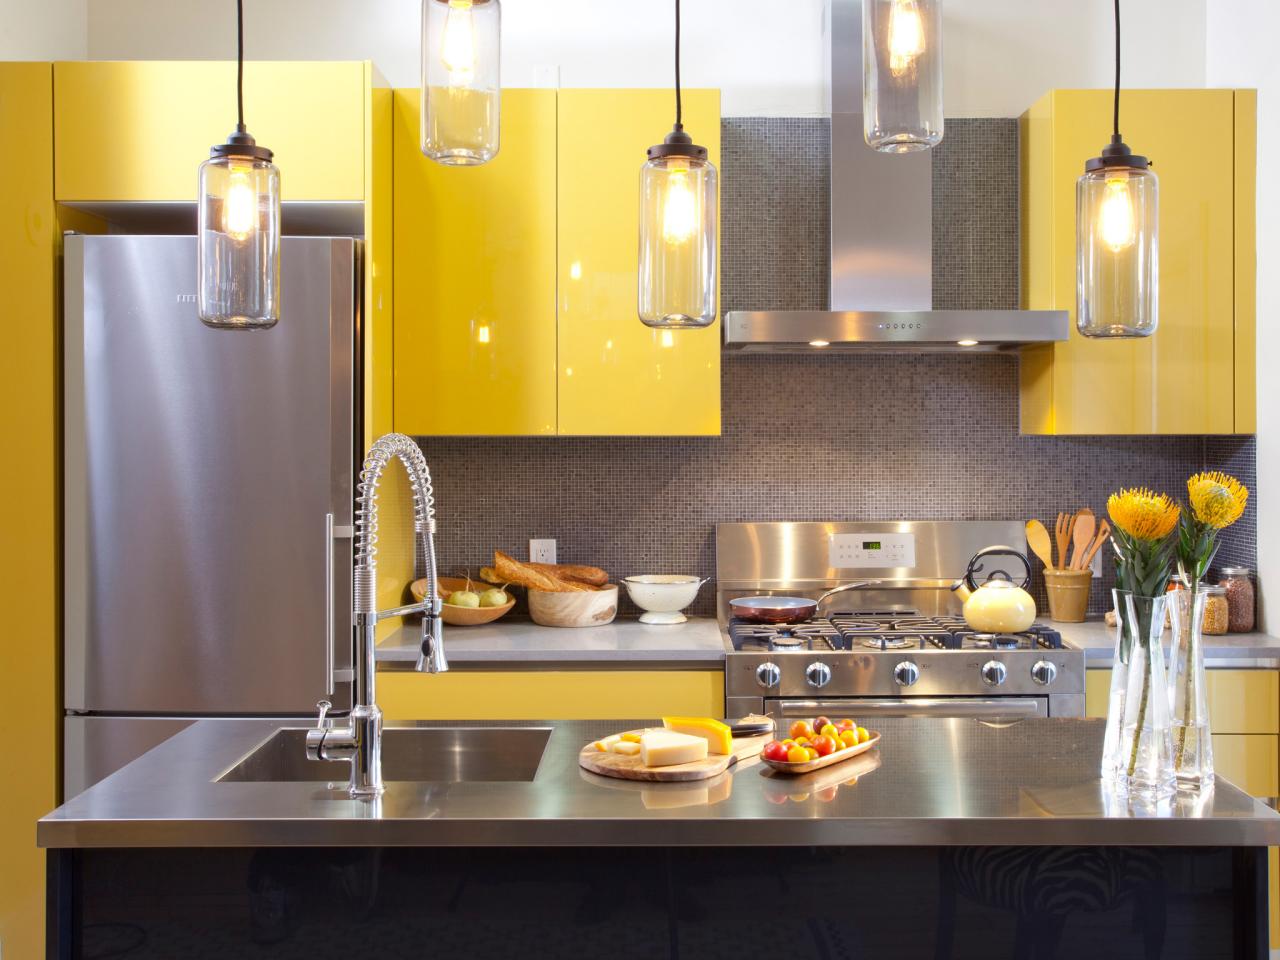 A kitchen with yellow cabinets and stainless steel appliances.